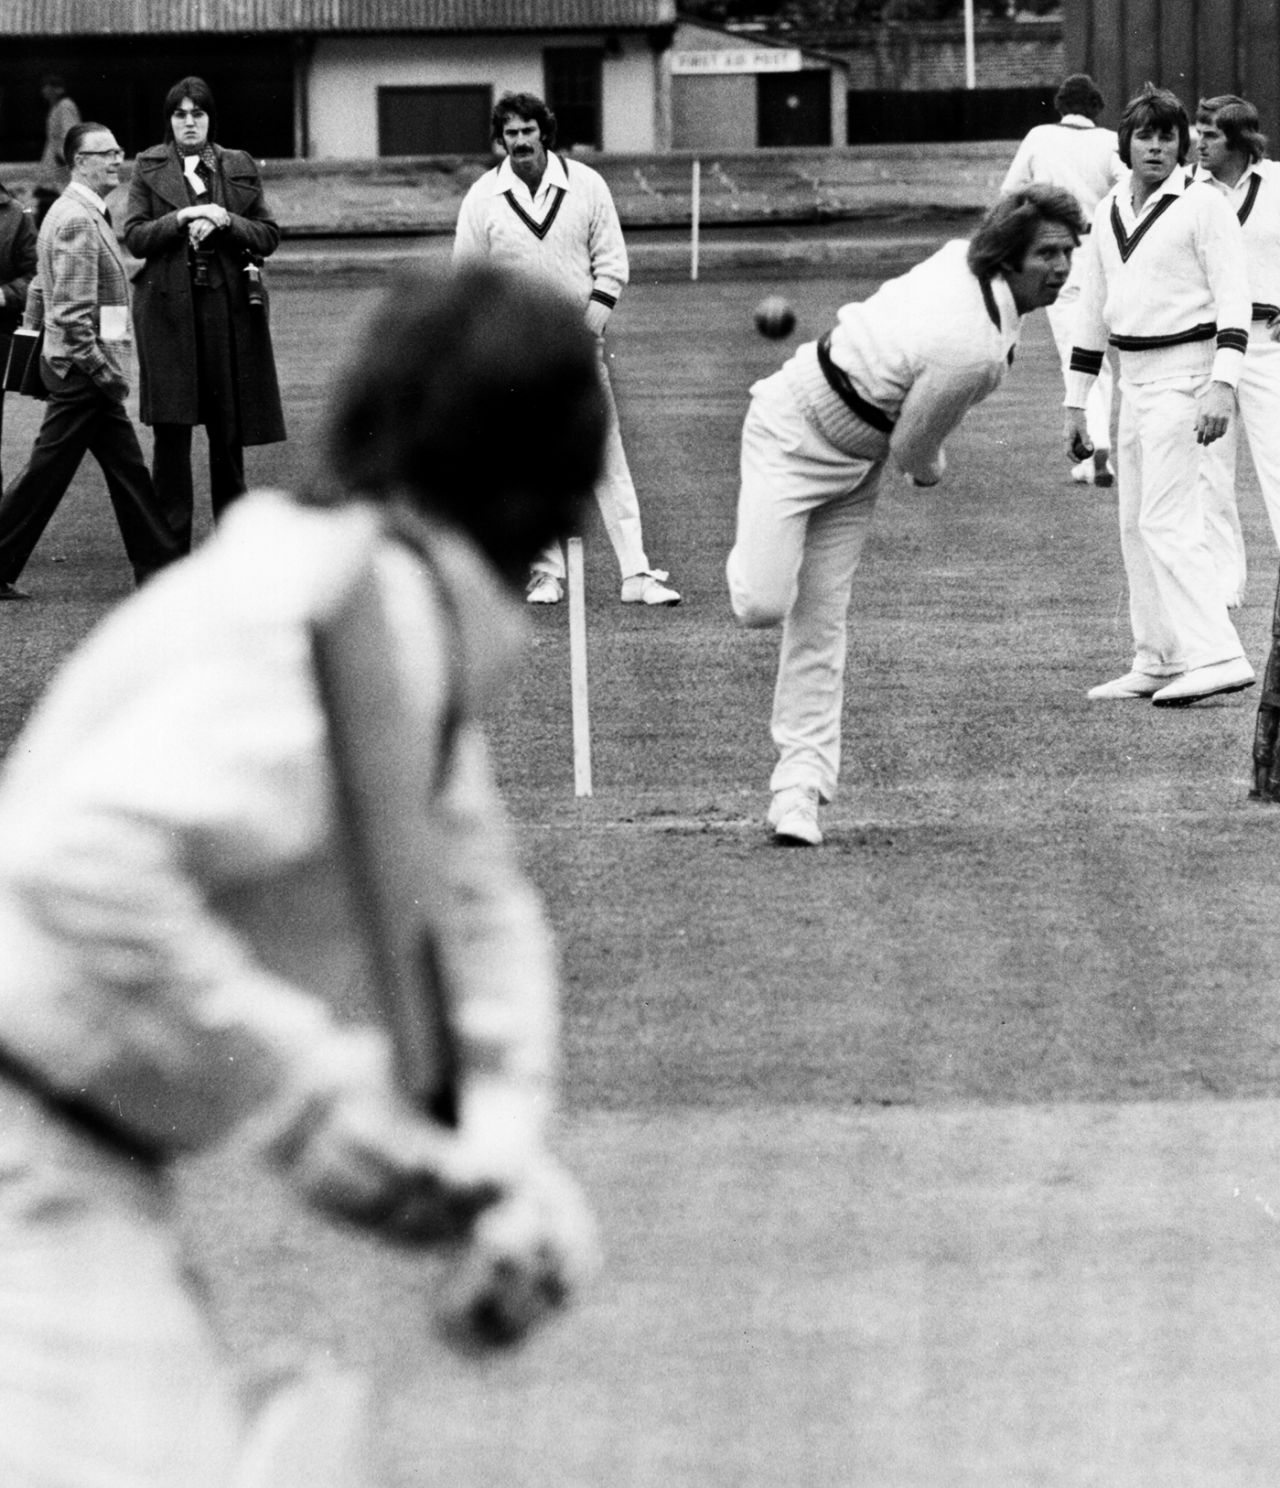 Jeff Thomson bowls in the nets at Lord's, June 2, 1975